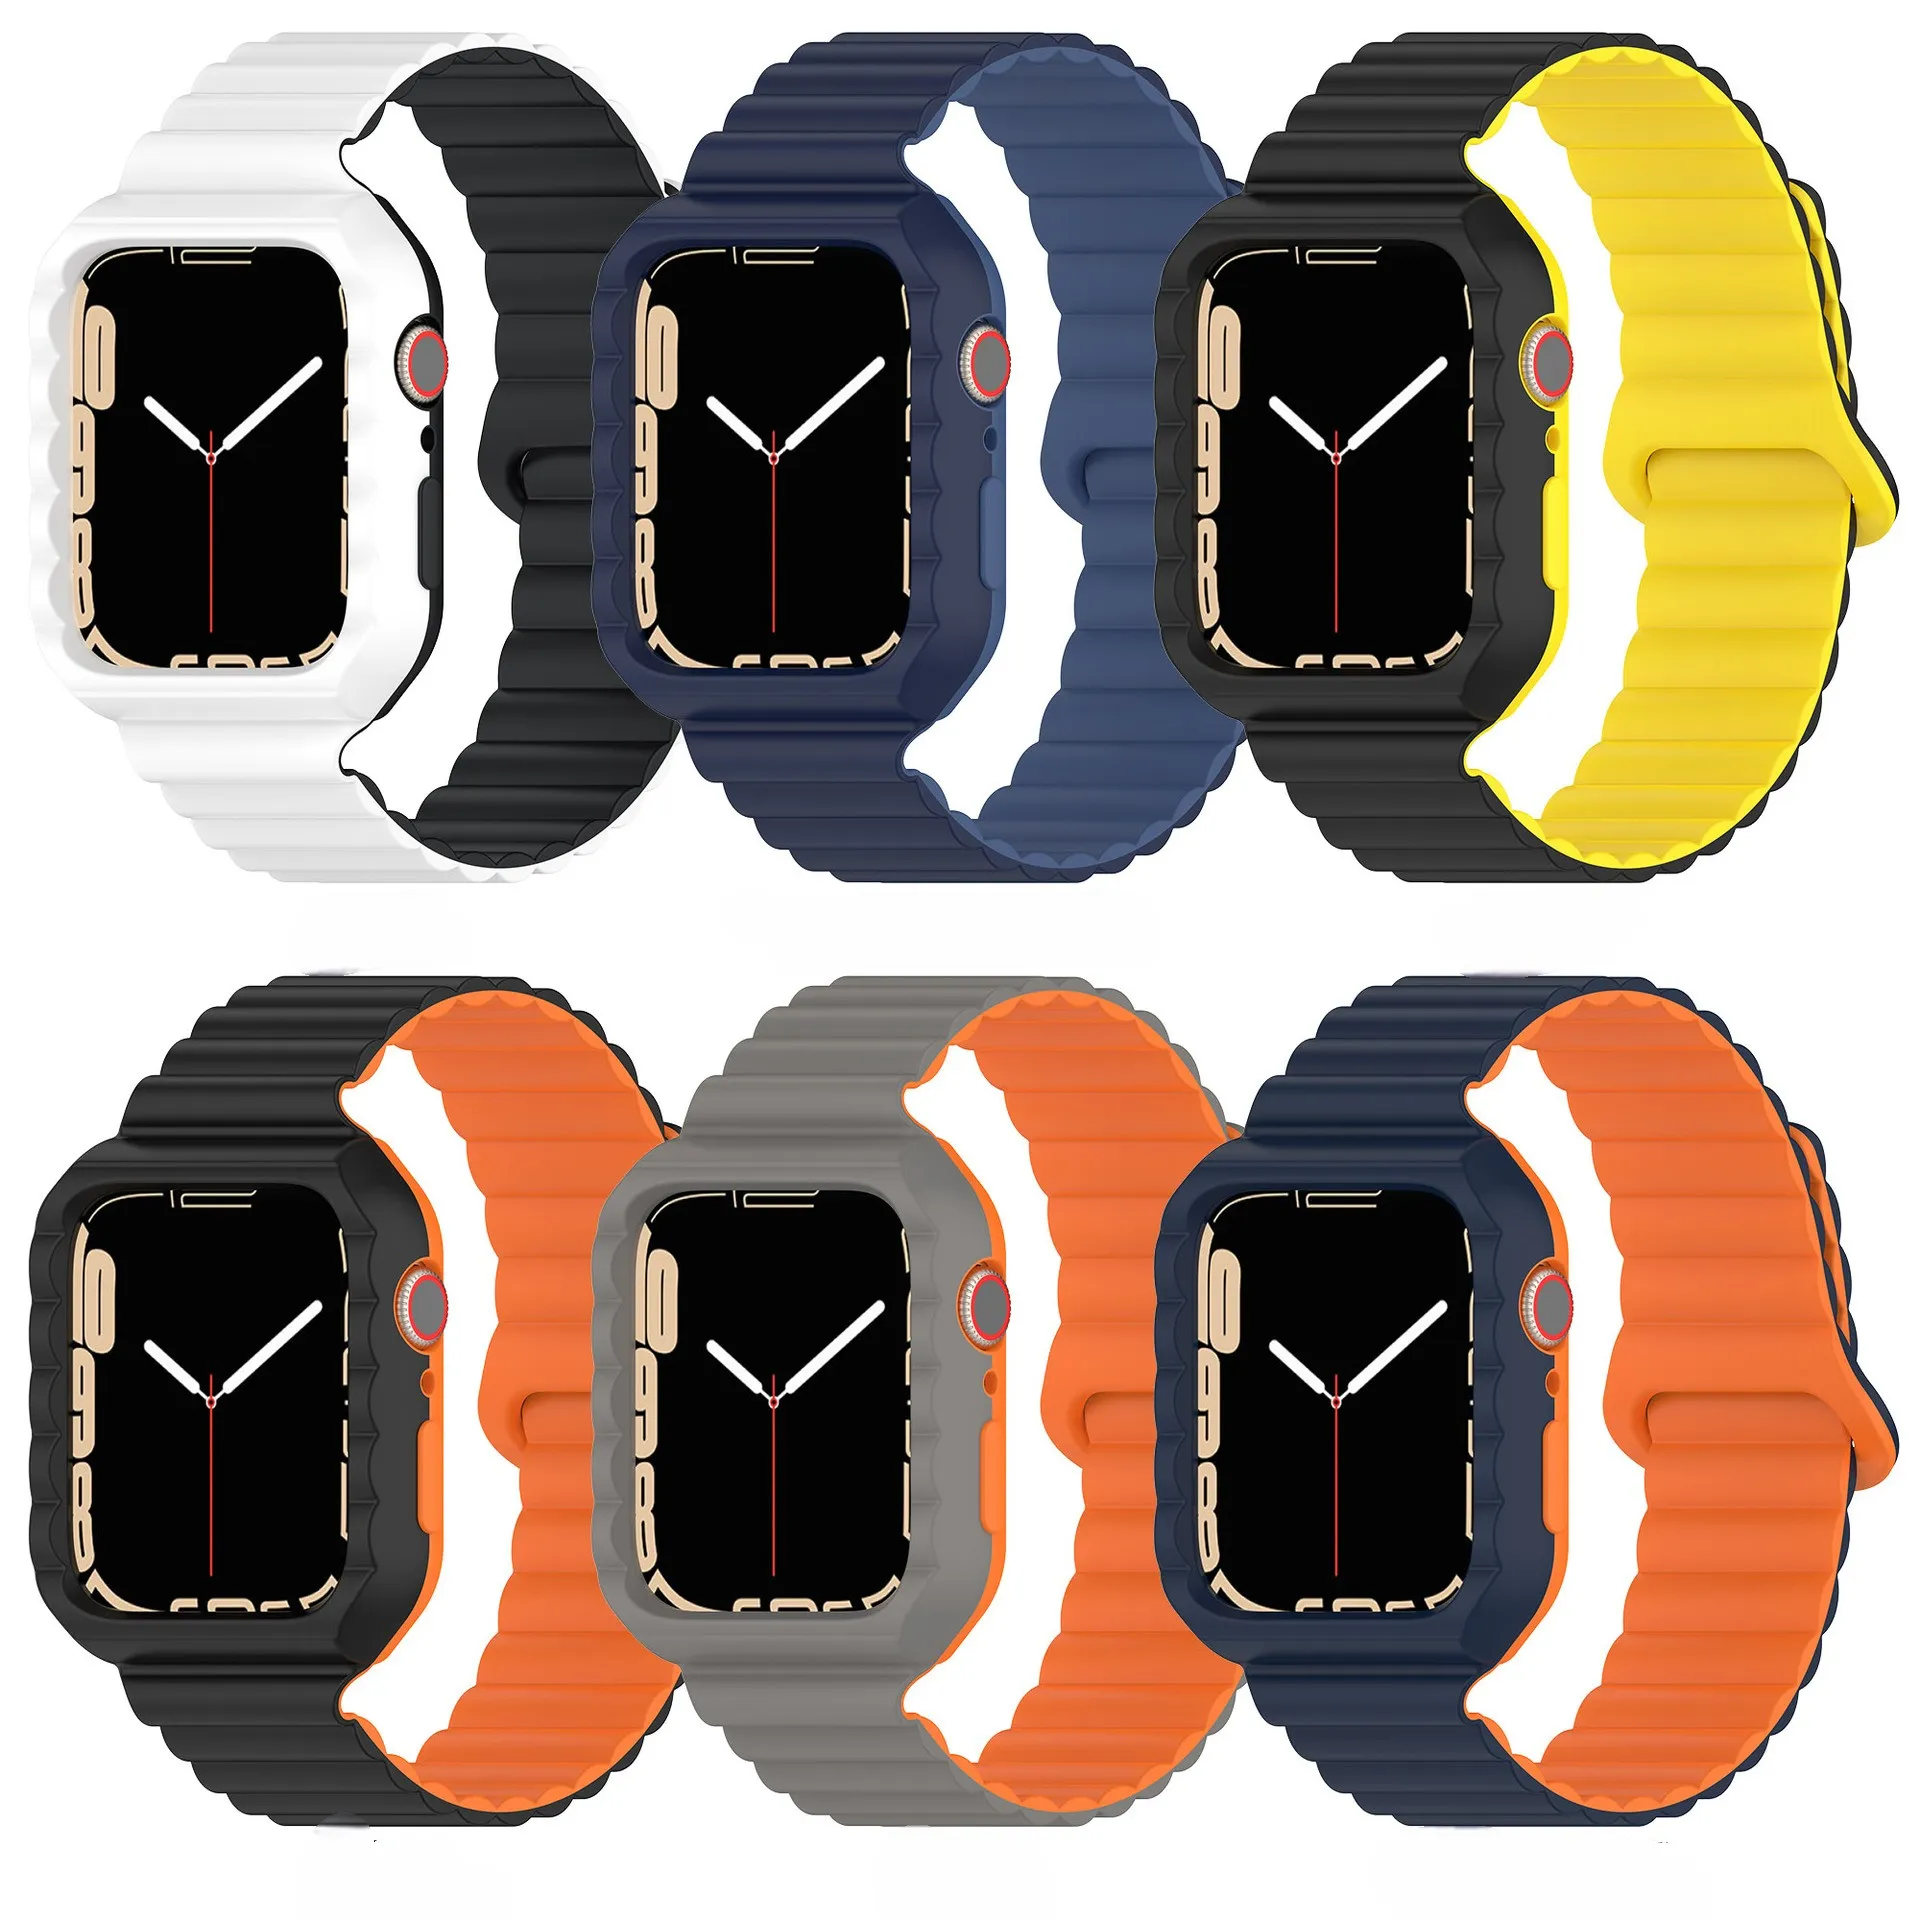 BOORUI two-tone silicone watch band for apple watch case band strap Silicone watch band